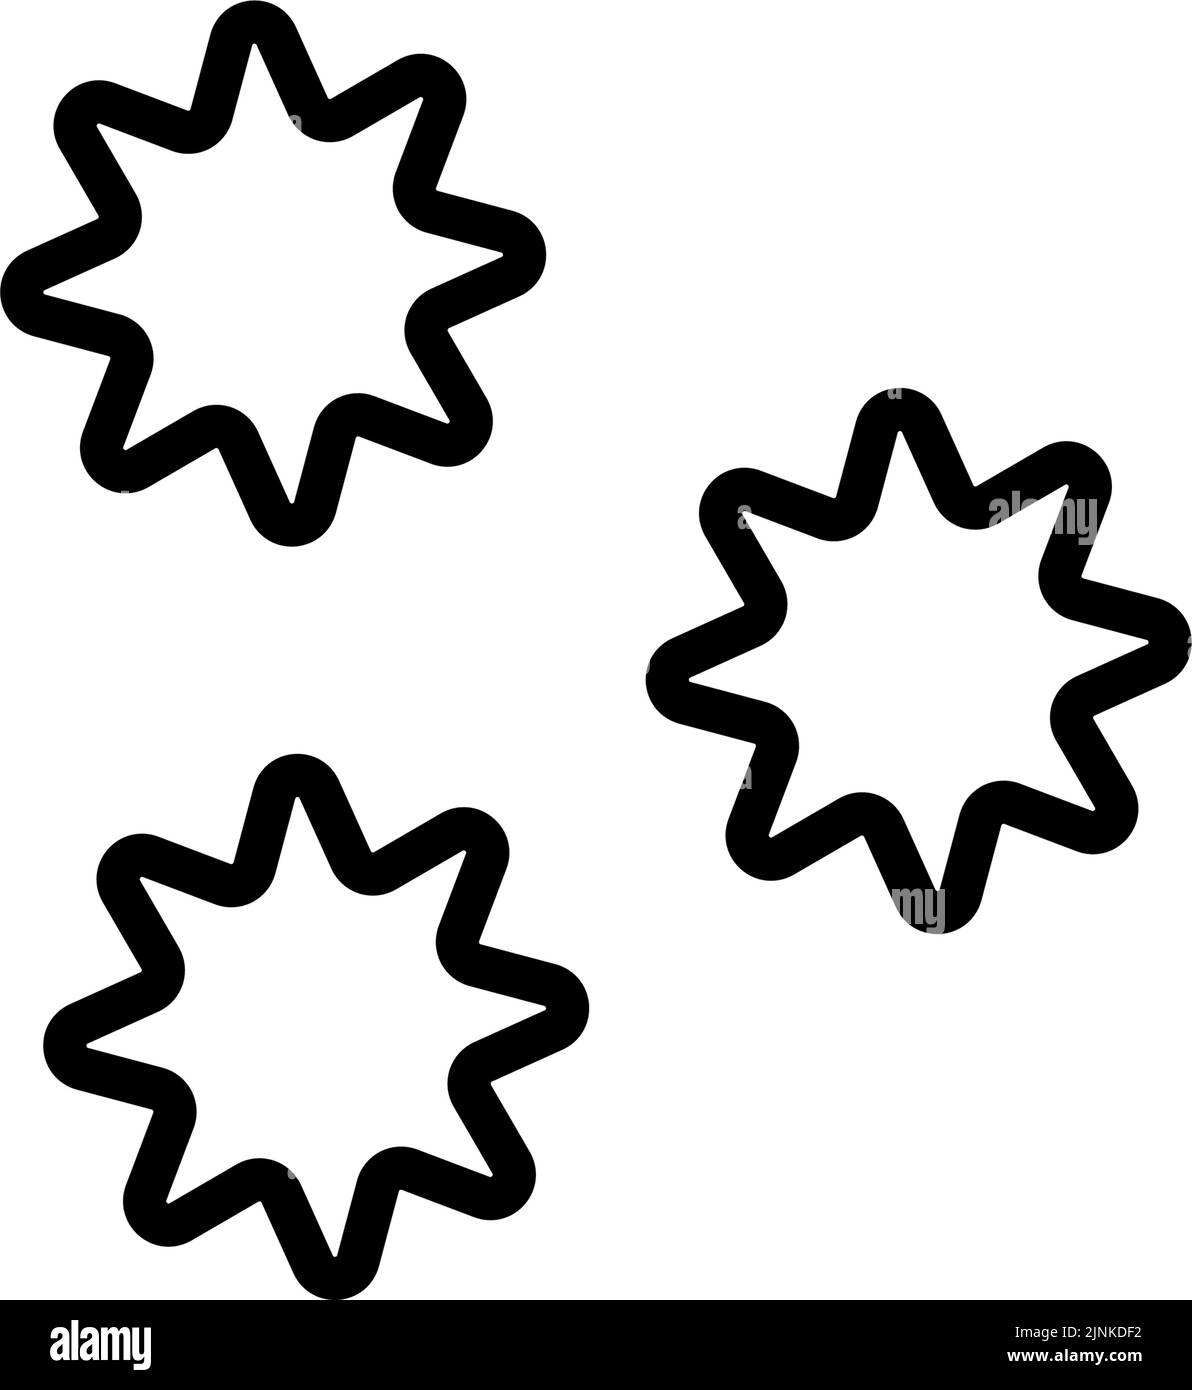 Simple pollen image icon, black and white Stock Vector